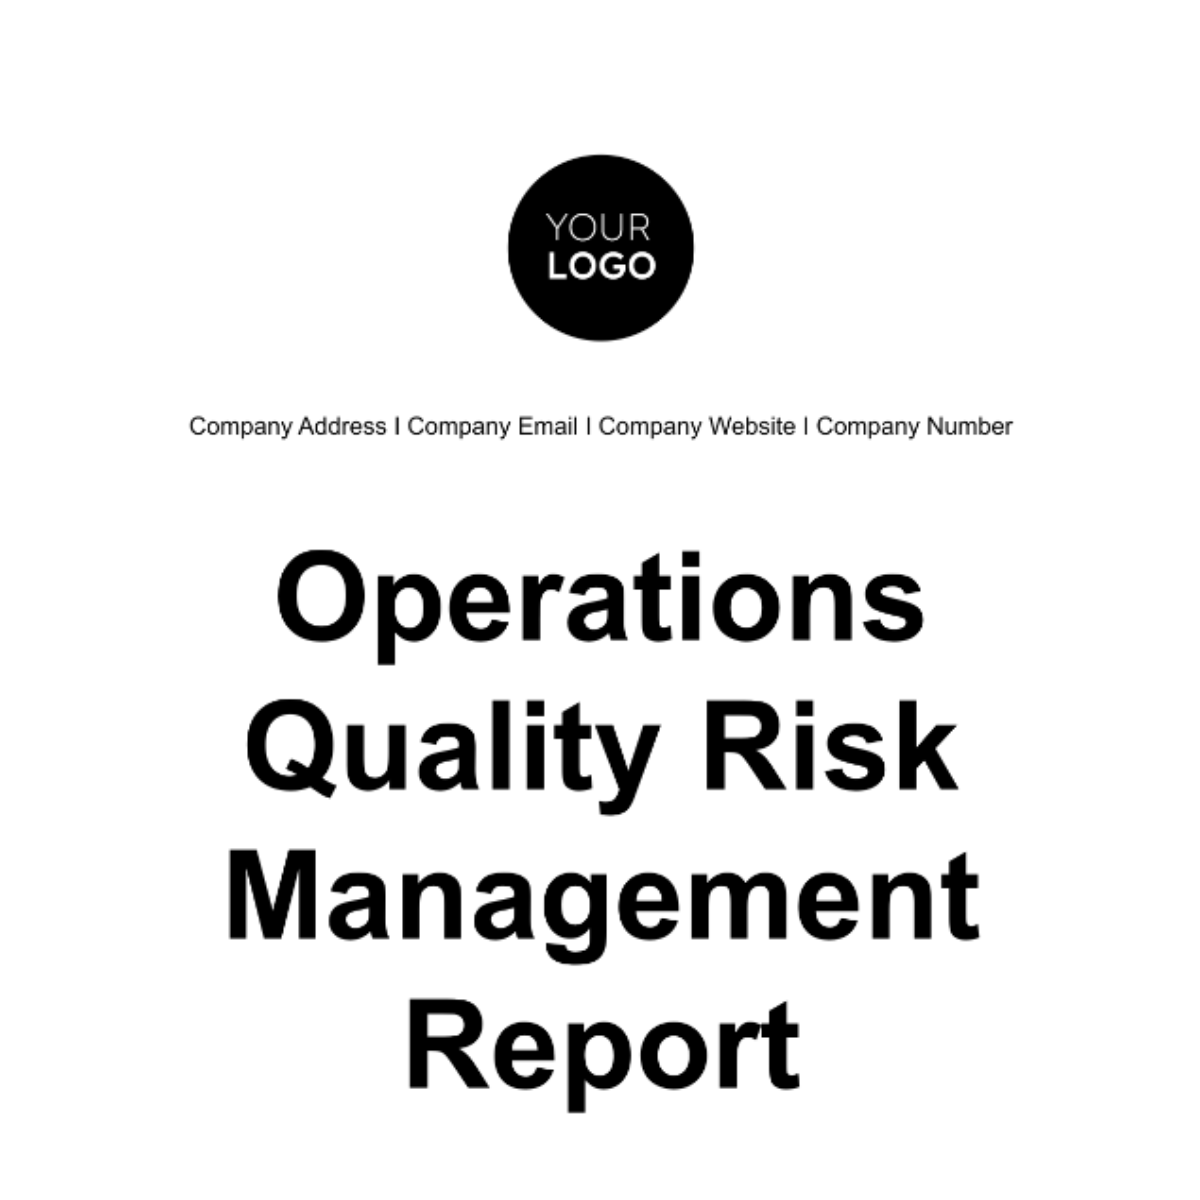 Operations Quality Risk Management Report Template